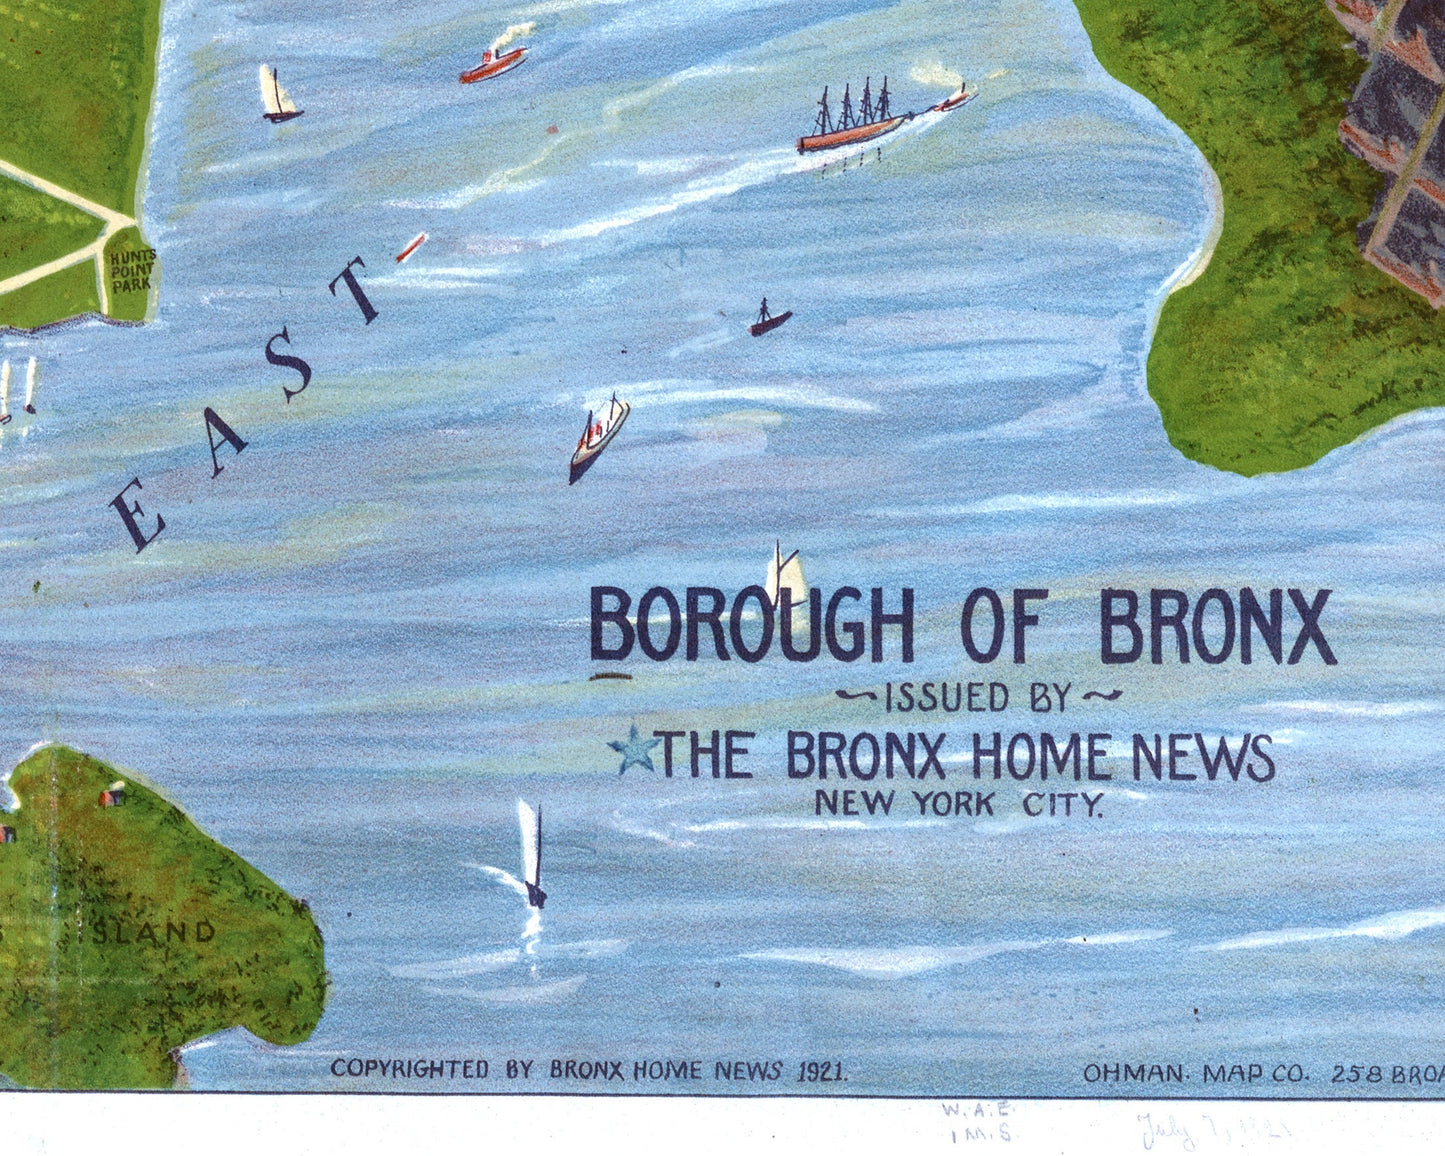 Antique New York map | Borough of Bronx | Bird's eye view | Boats in 1920's American harbor | Vintage cartography | Travelers wall art